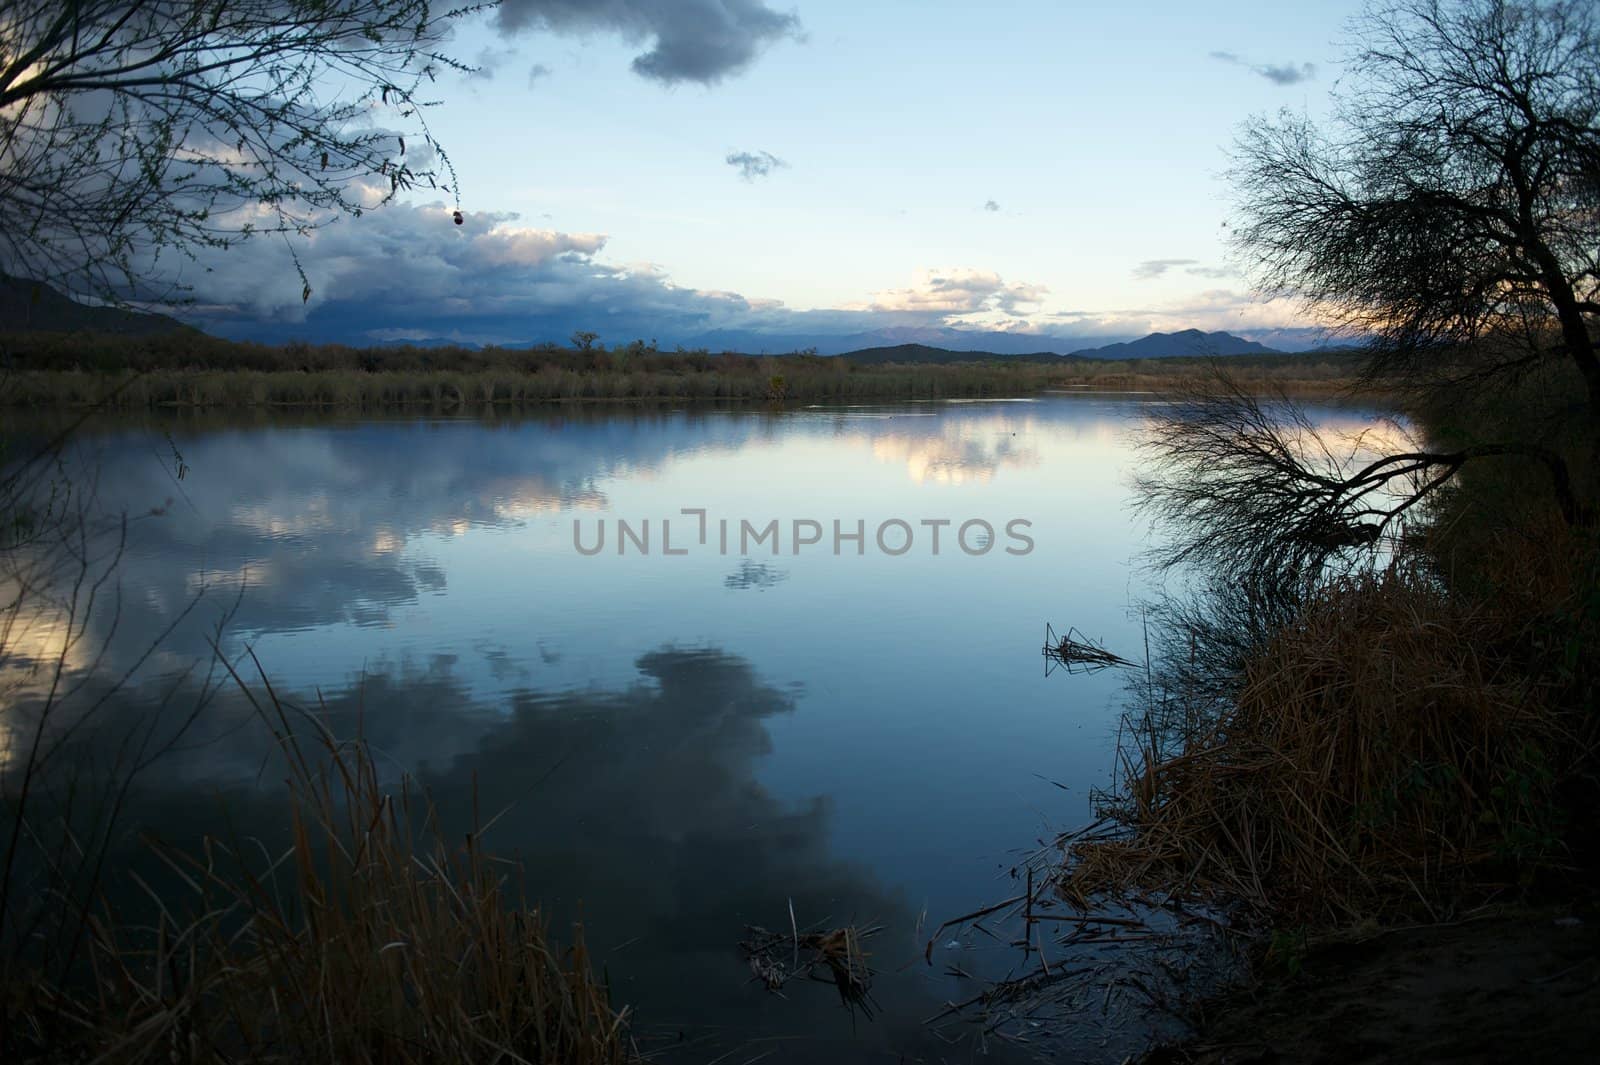 Calm river in the desert with mountain views and the reflections of white clouds